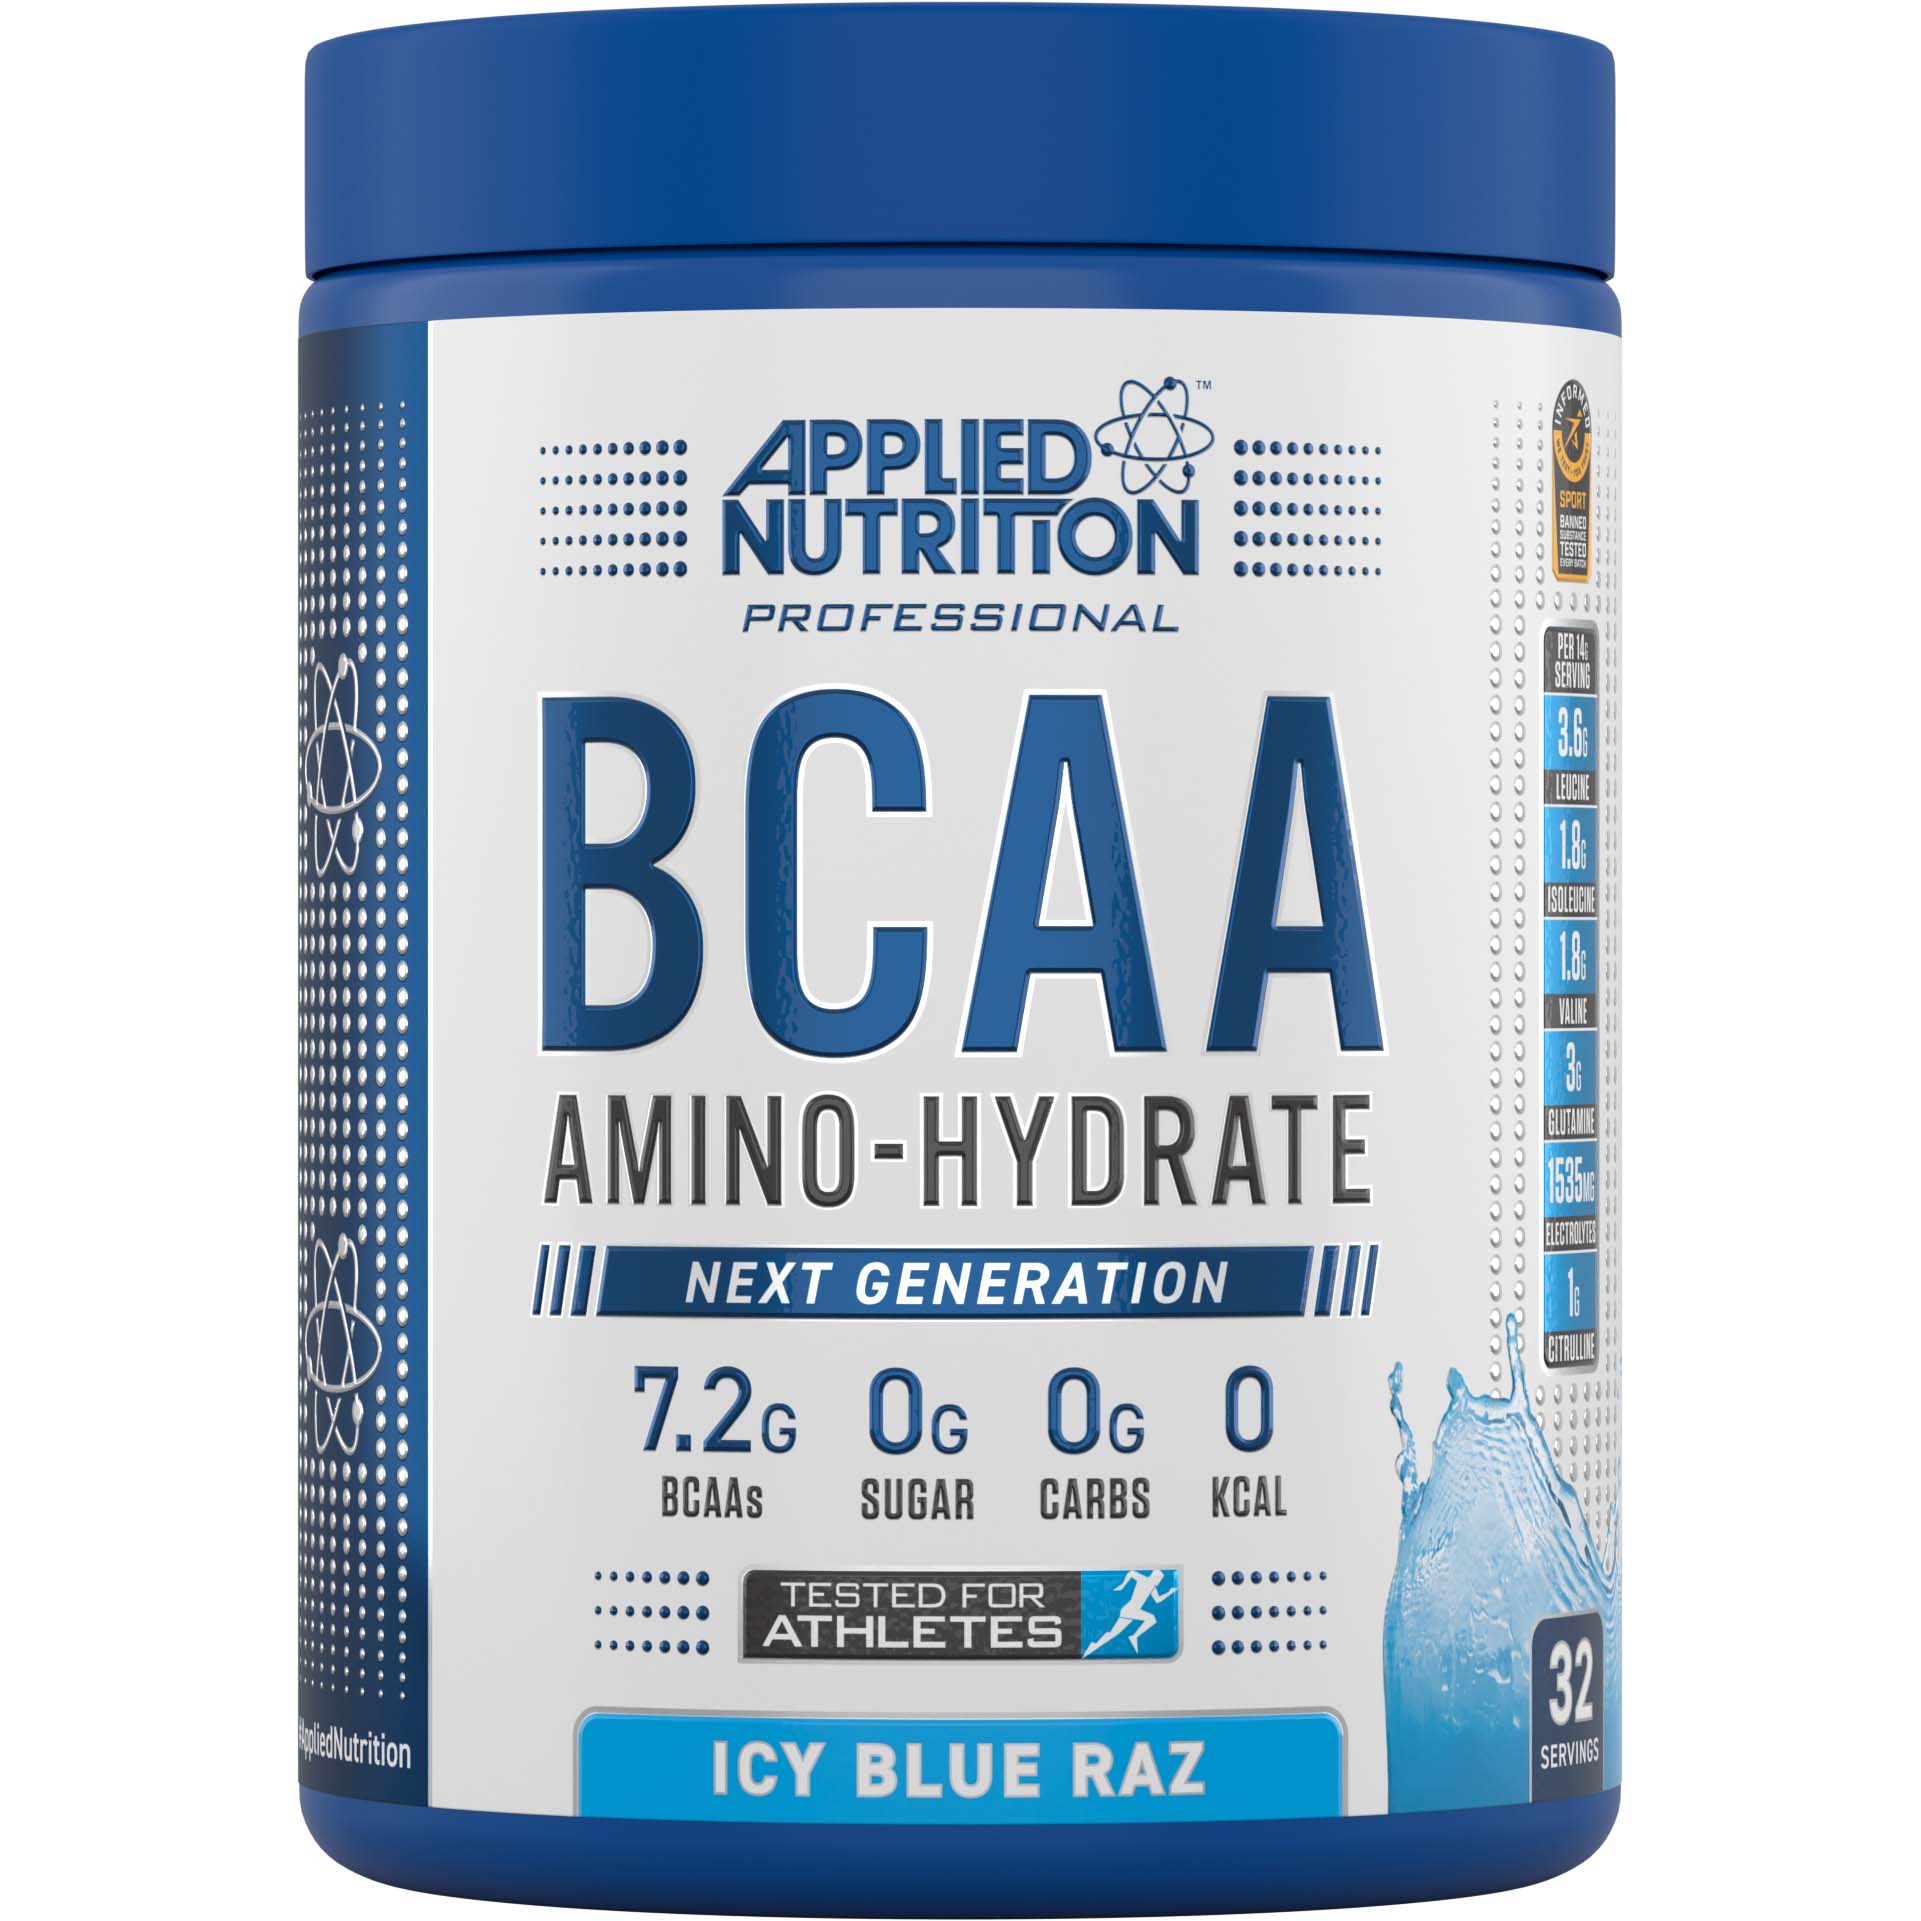 Applied Nutrition BCAA Amino Hydrate, Icy Blue Raz, 32 Serving